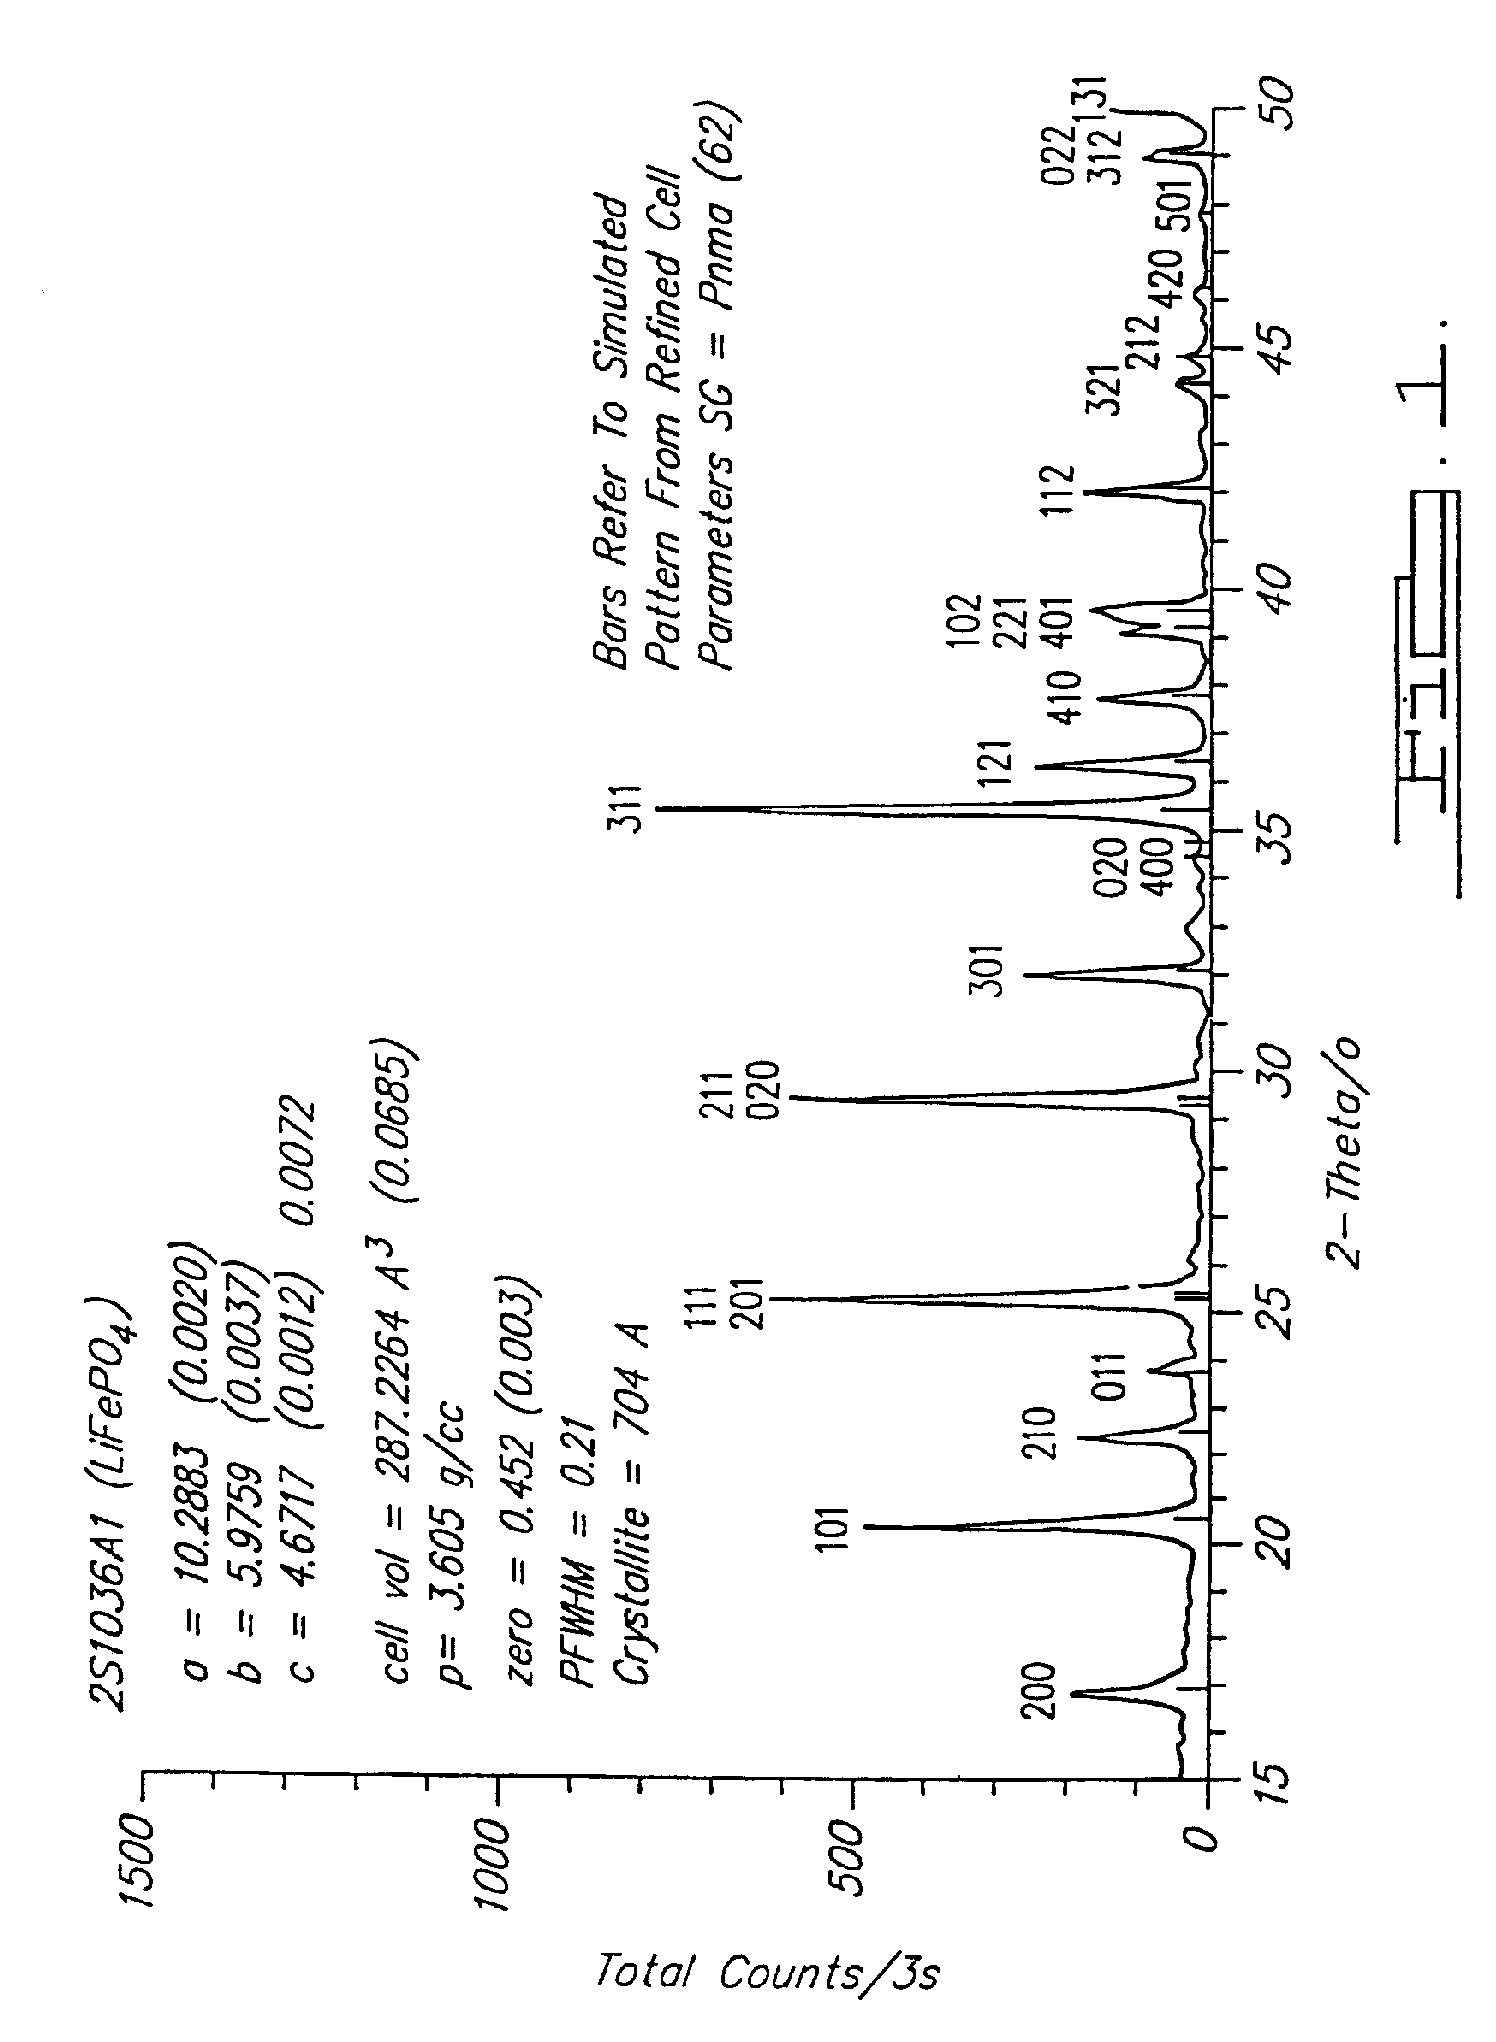 Lithium-based active materials and preparation thereof